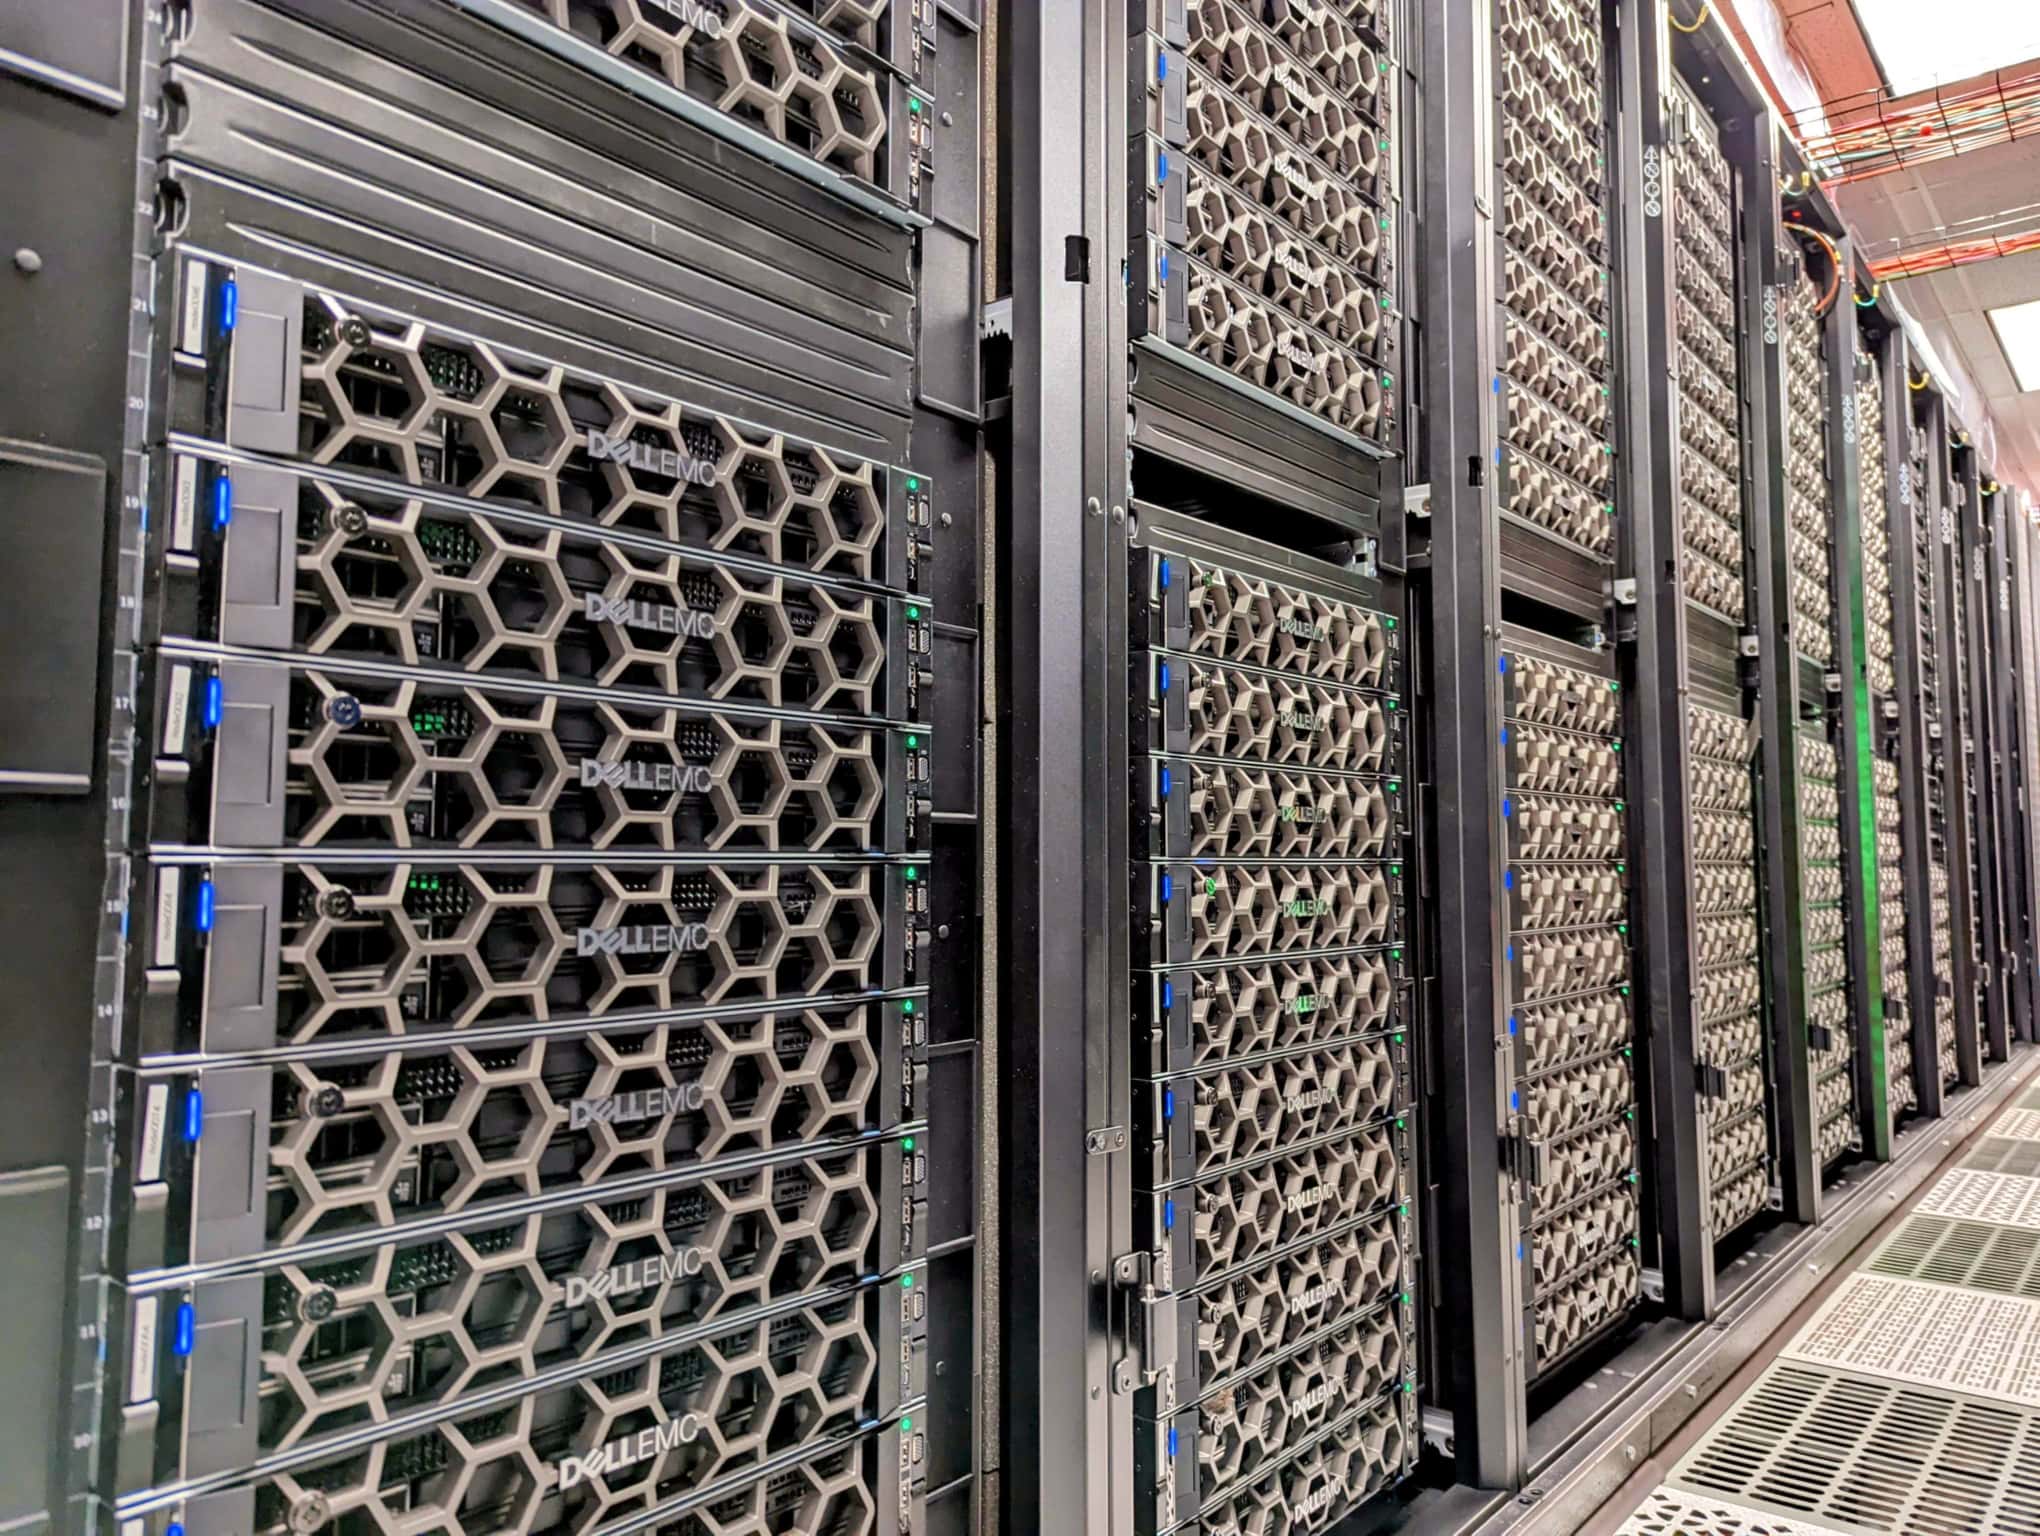 Palmetto cluster racks at the data center